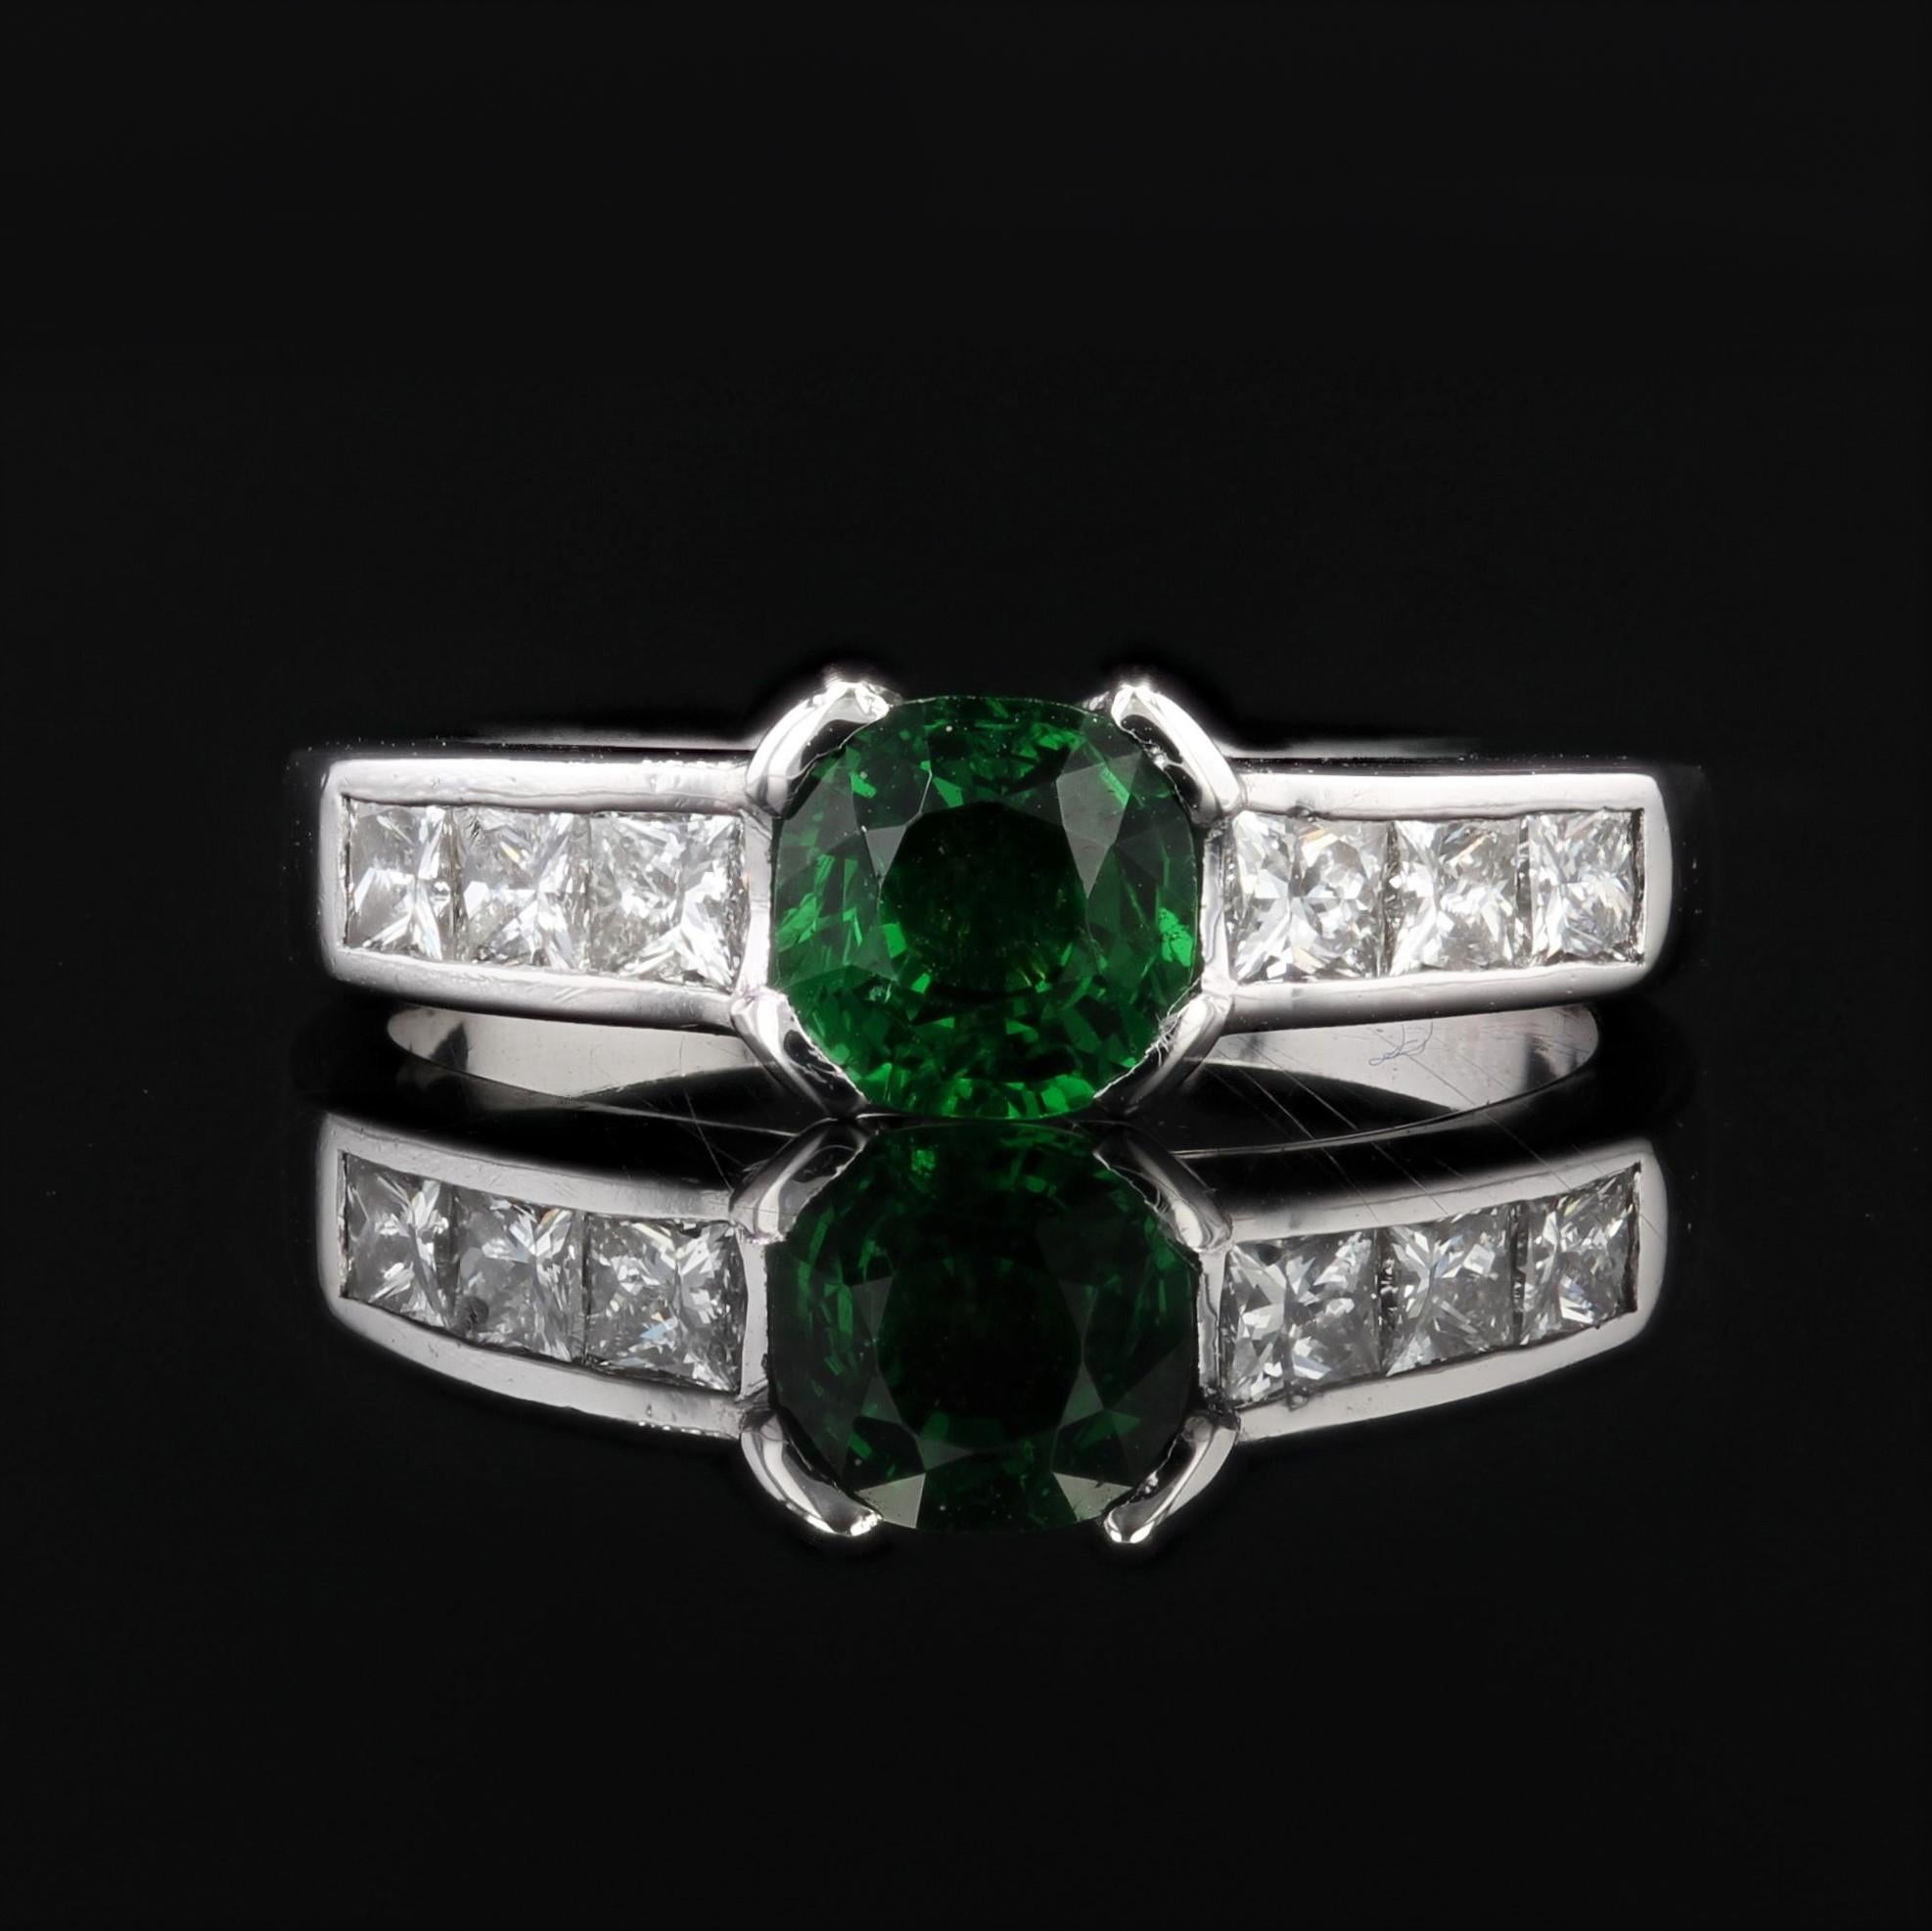 French Modern 1, 02 Carat Tsavorite Garnet Princess-Cut Diamonds White Gold Ring In Excellent Condition For Sale In Poitiers, FR